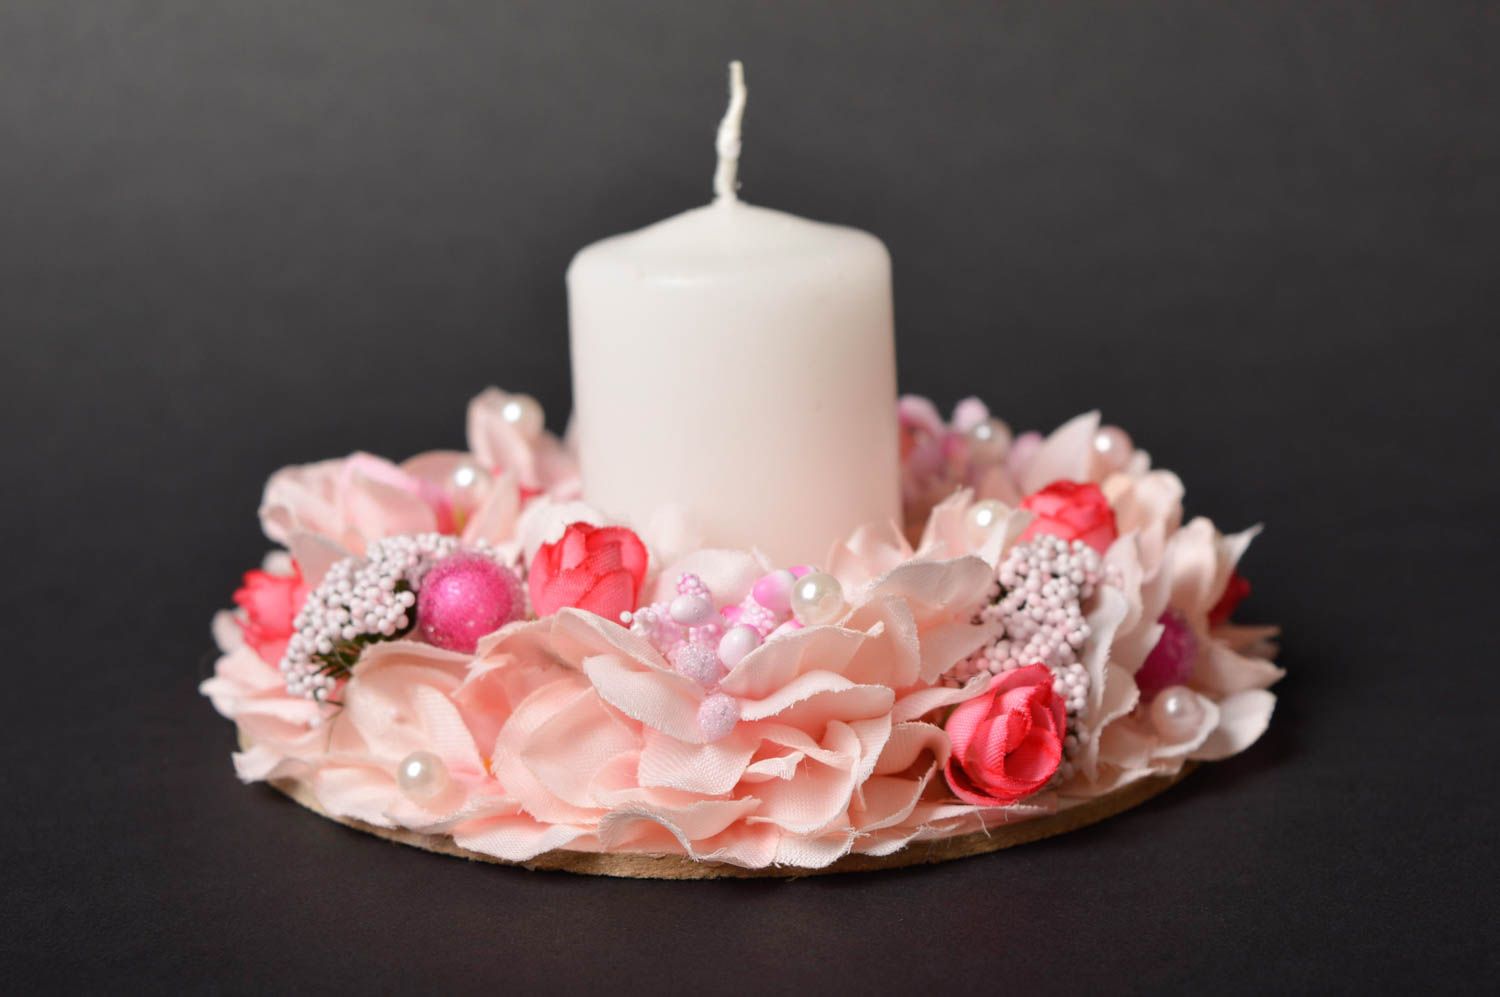 Handmade decorative candles wedding candle unity candle wedding accessories photo 2